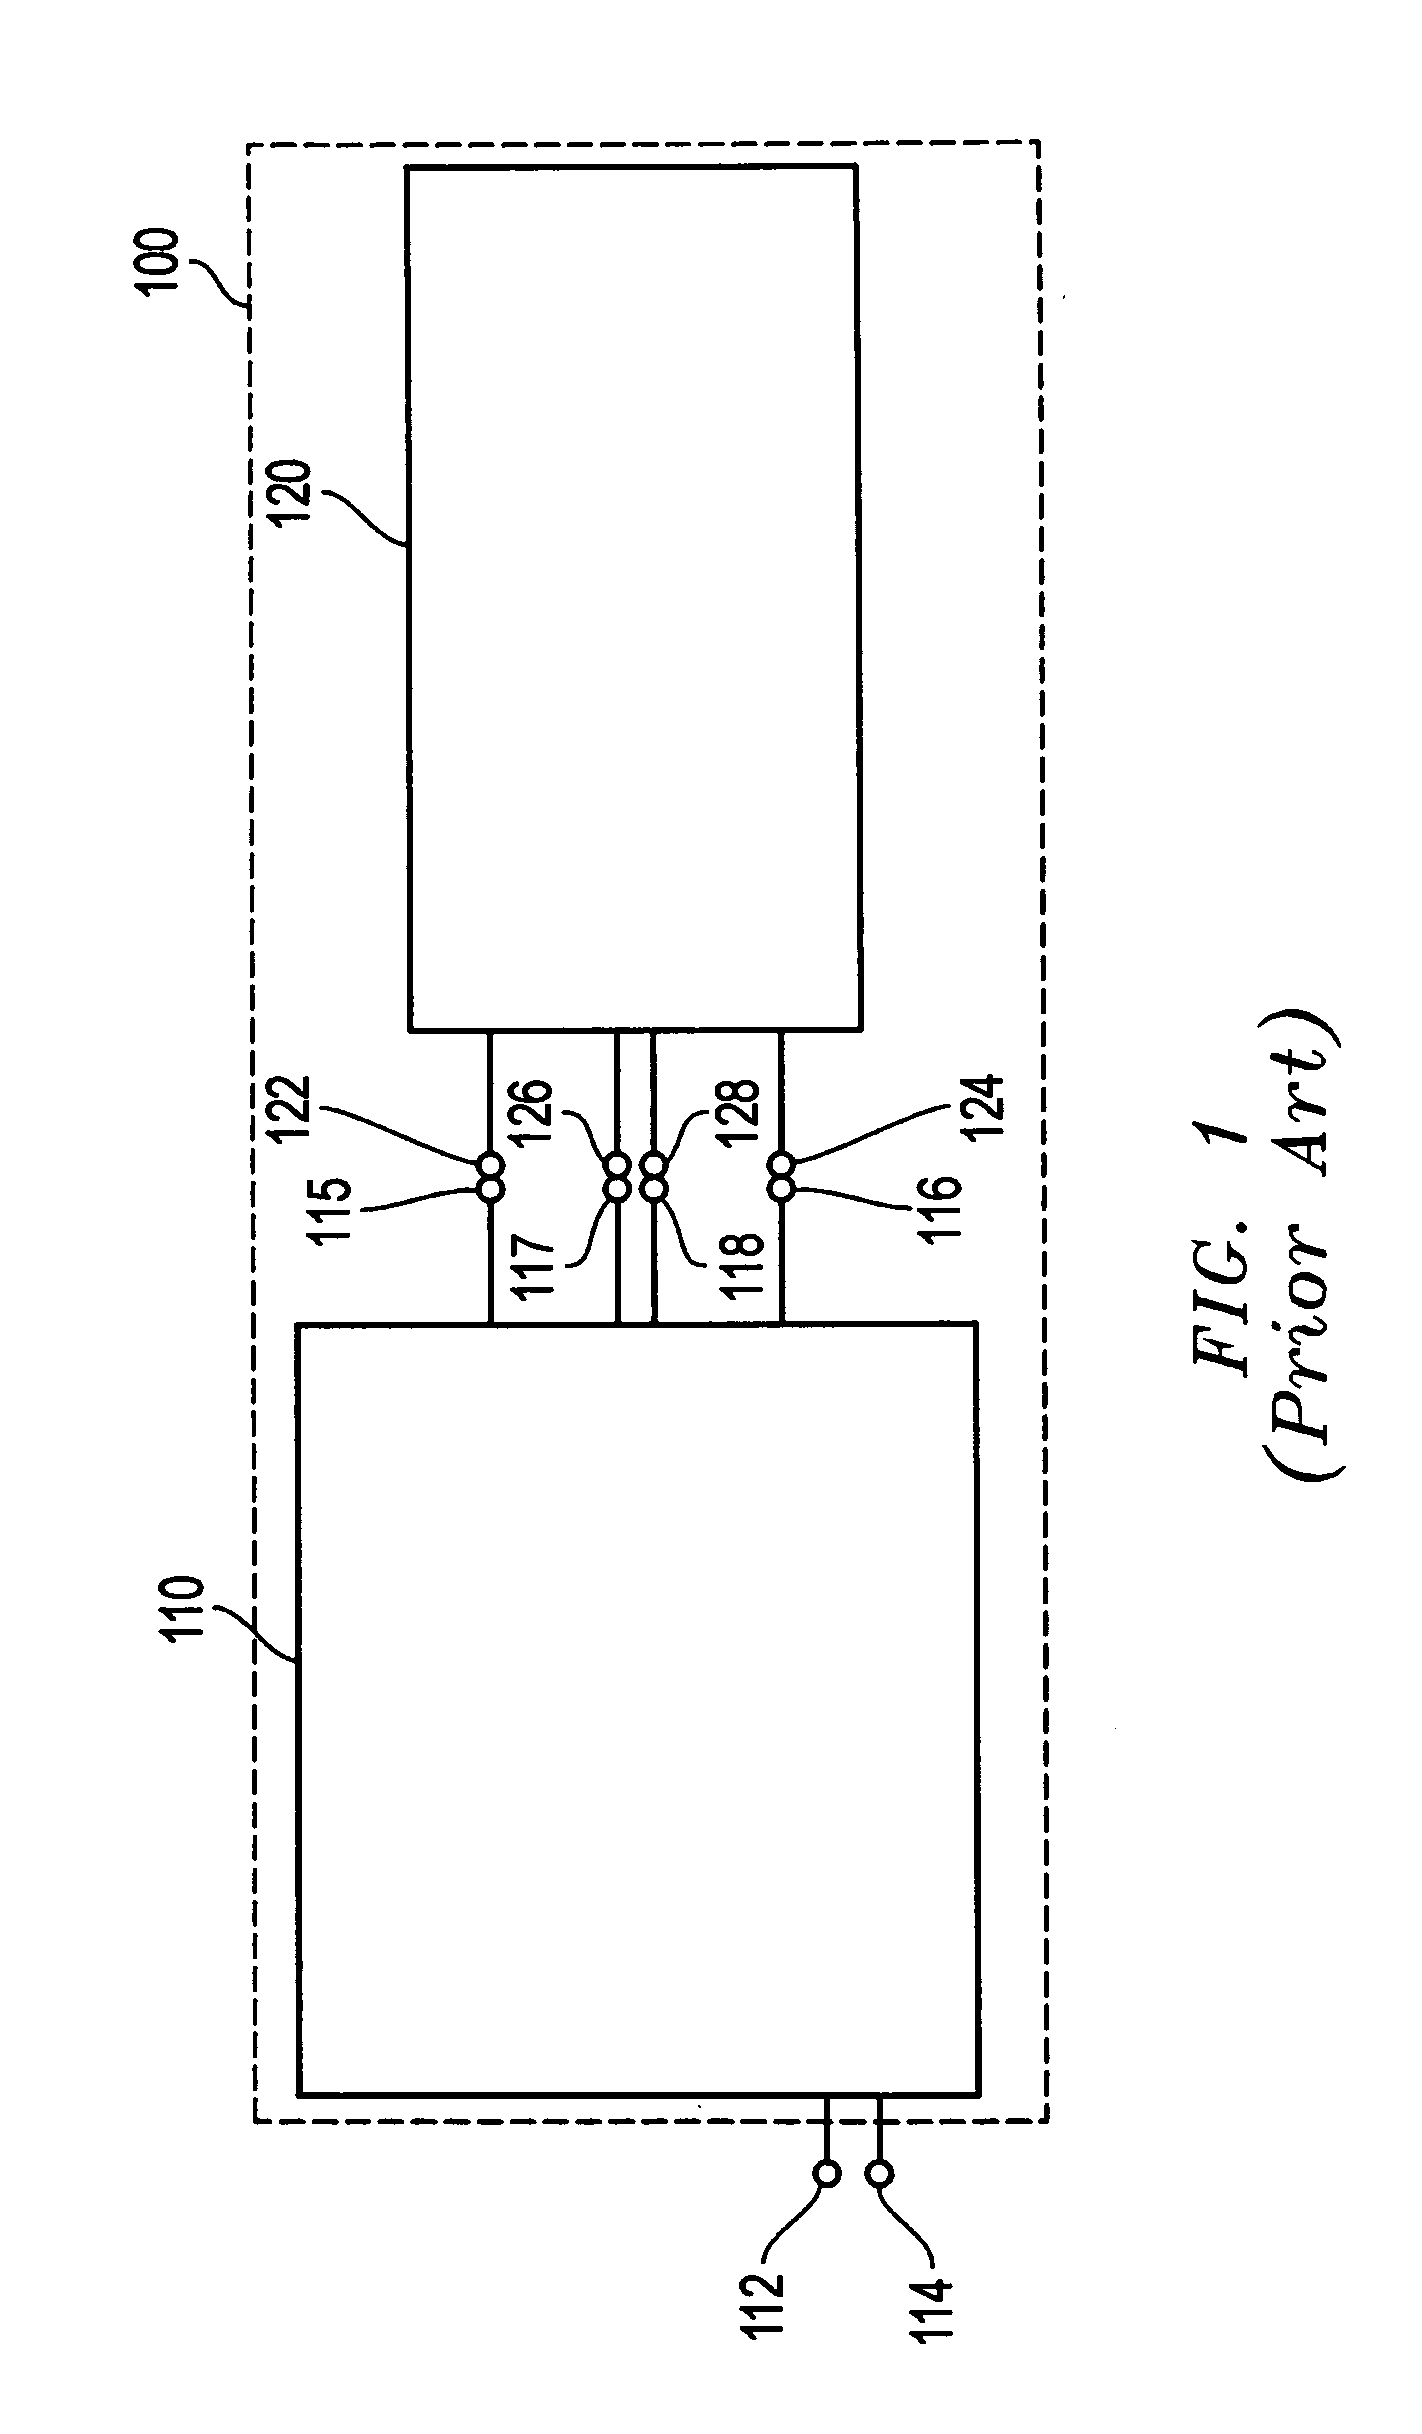 Systems and methods for detecting charge switching element failure in a battery system